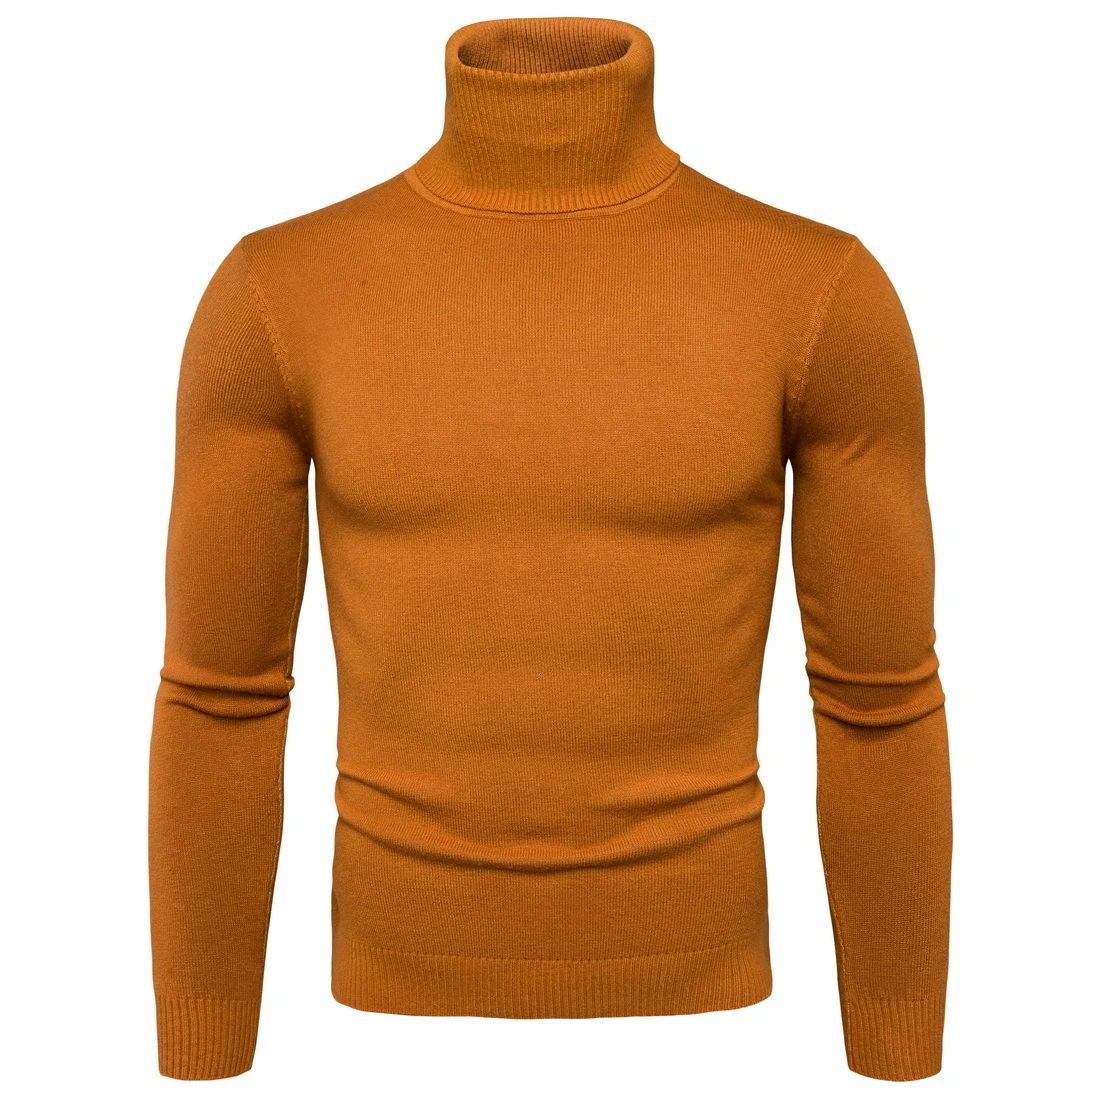 mens turtleneck 2021 New Men's Warm Turtleneck sweater Slim Fit Knitted Pullovers Tops Male Long Sleeve Solid Color Autumn Winter Sweaters M-3XL mens sweaters on sale Sweaters